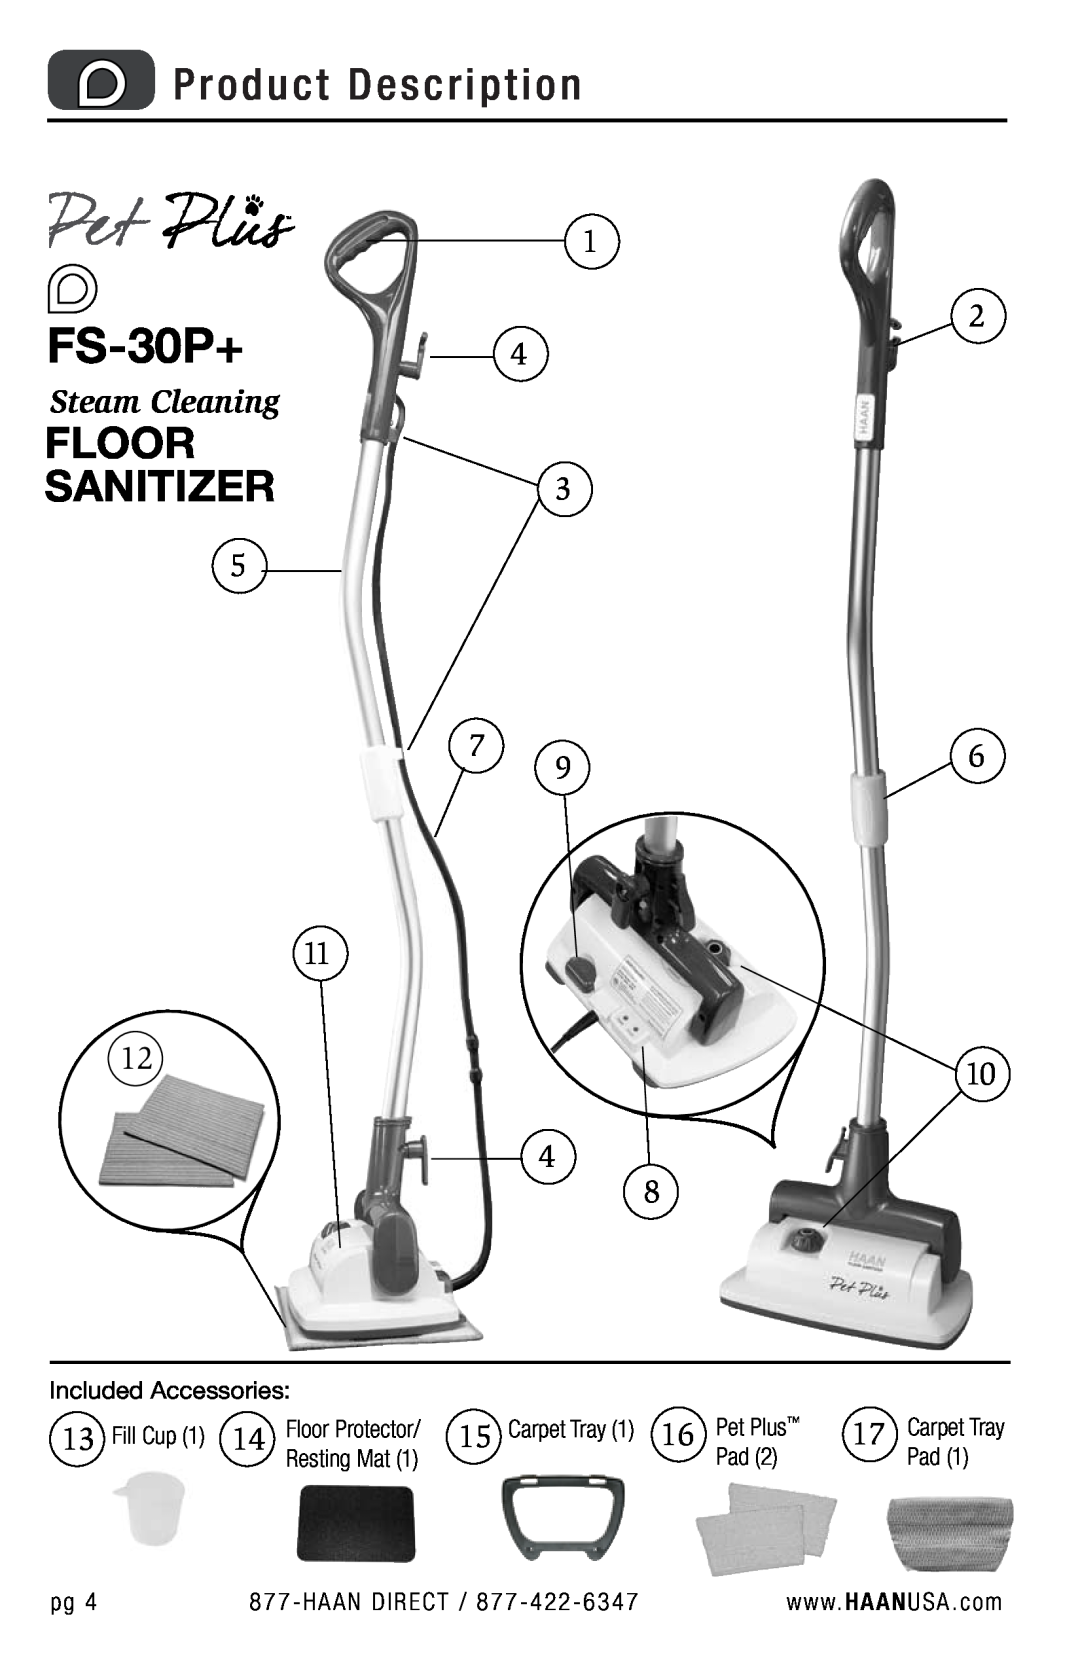 Haan FS-30P+ user manual Product Description, Floor Sanitizer3, Included Accessories, Fill Cup 1, Pet Plus, Steam Cleaning 